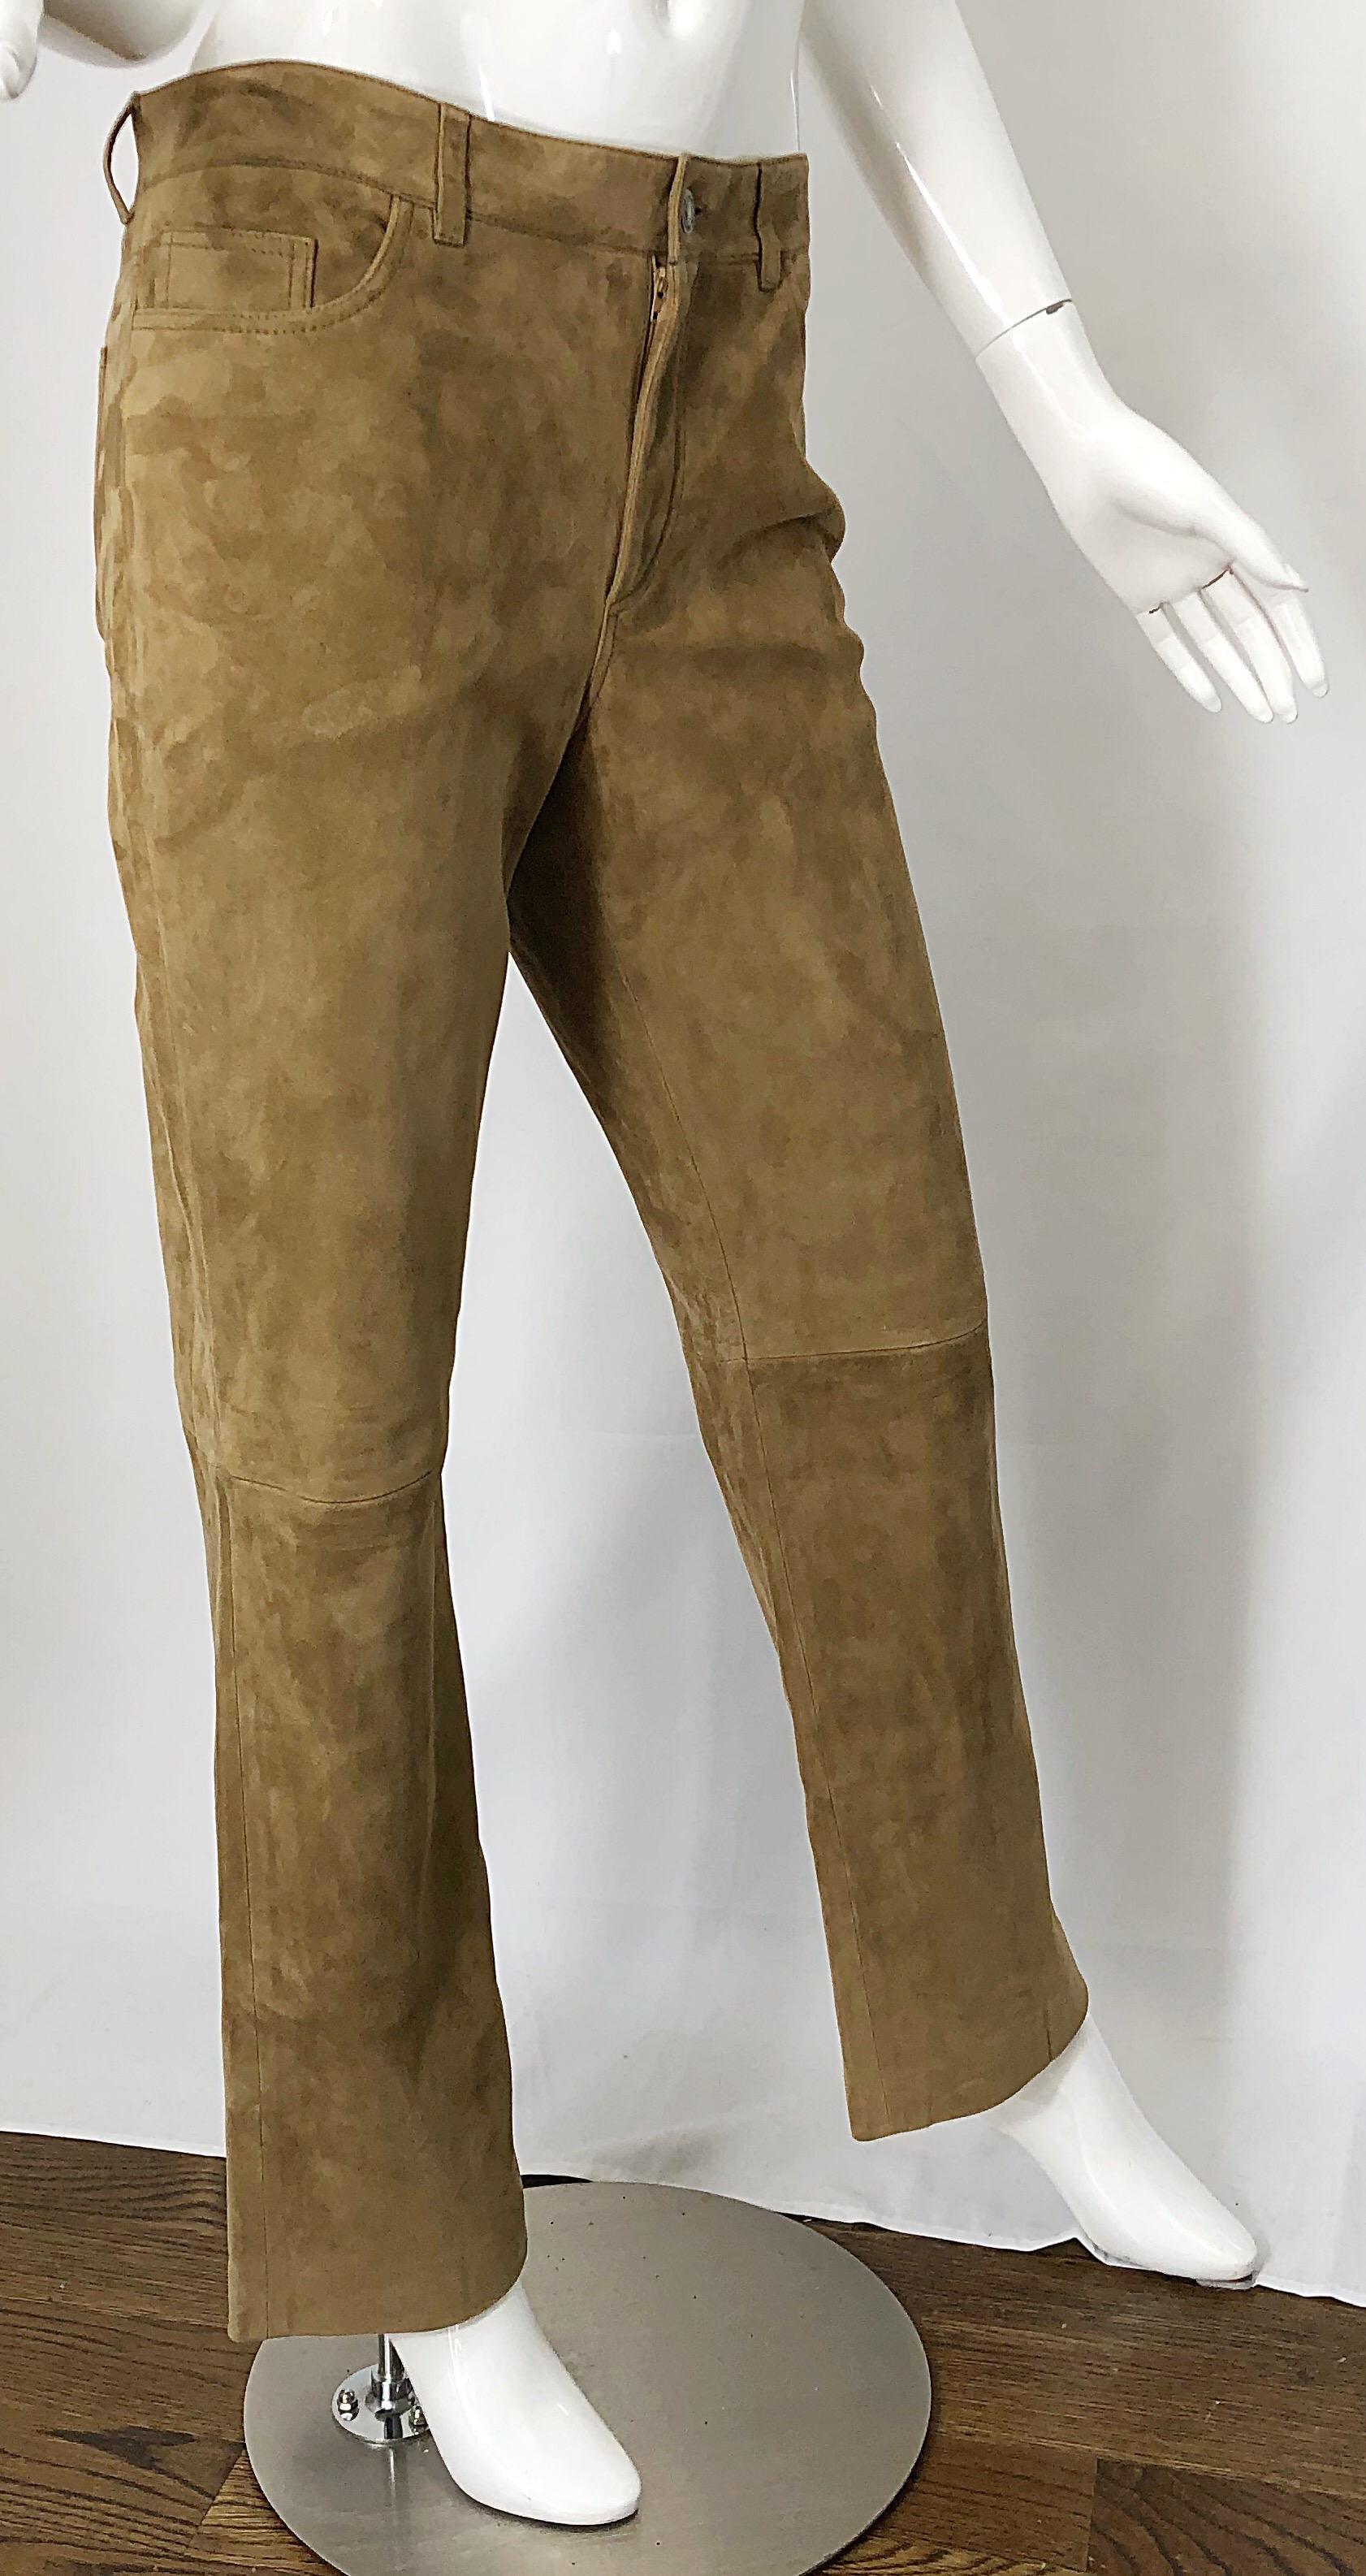 Vintage Loro Piana Suede Leather Camel Size 44 / 8 High Waisted 1990s 90s Pants In Excellent Condition For Sale In San Diego, CA